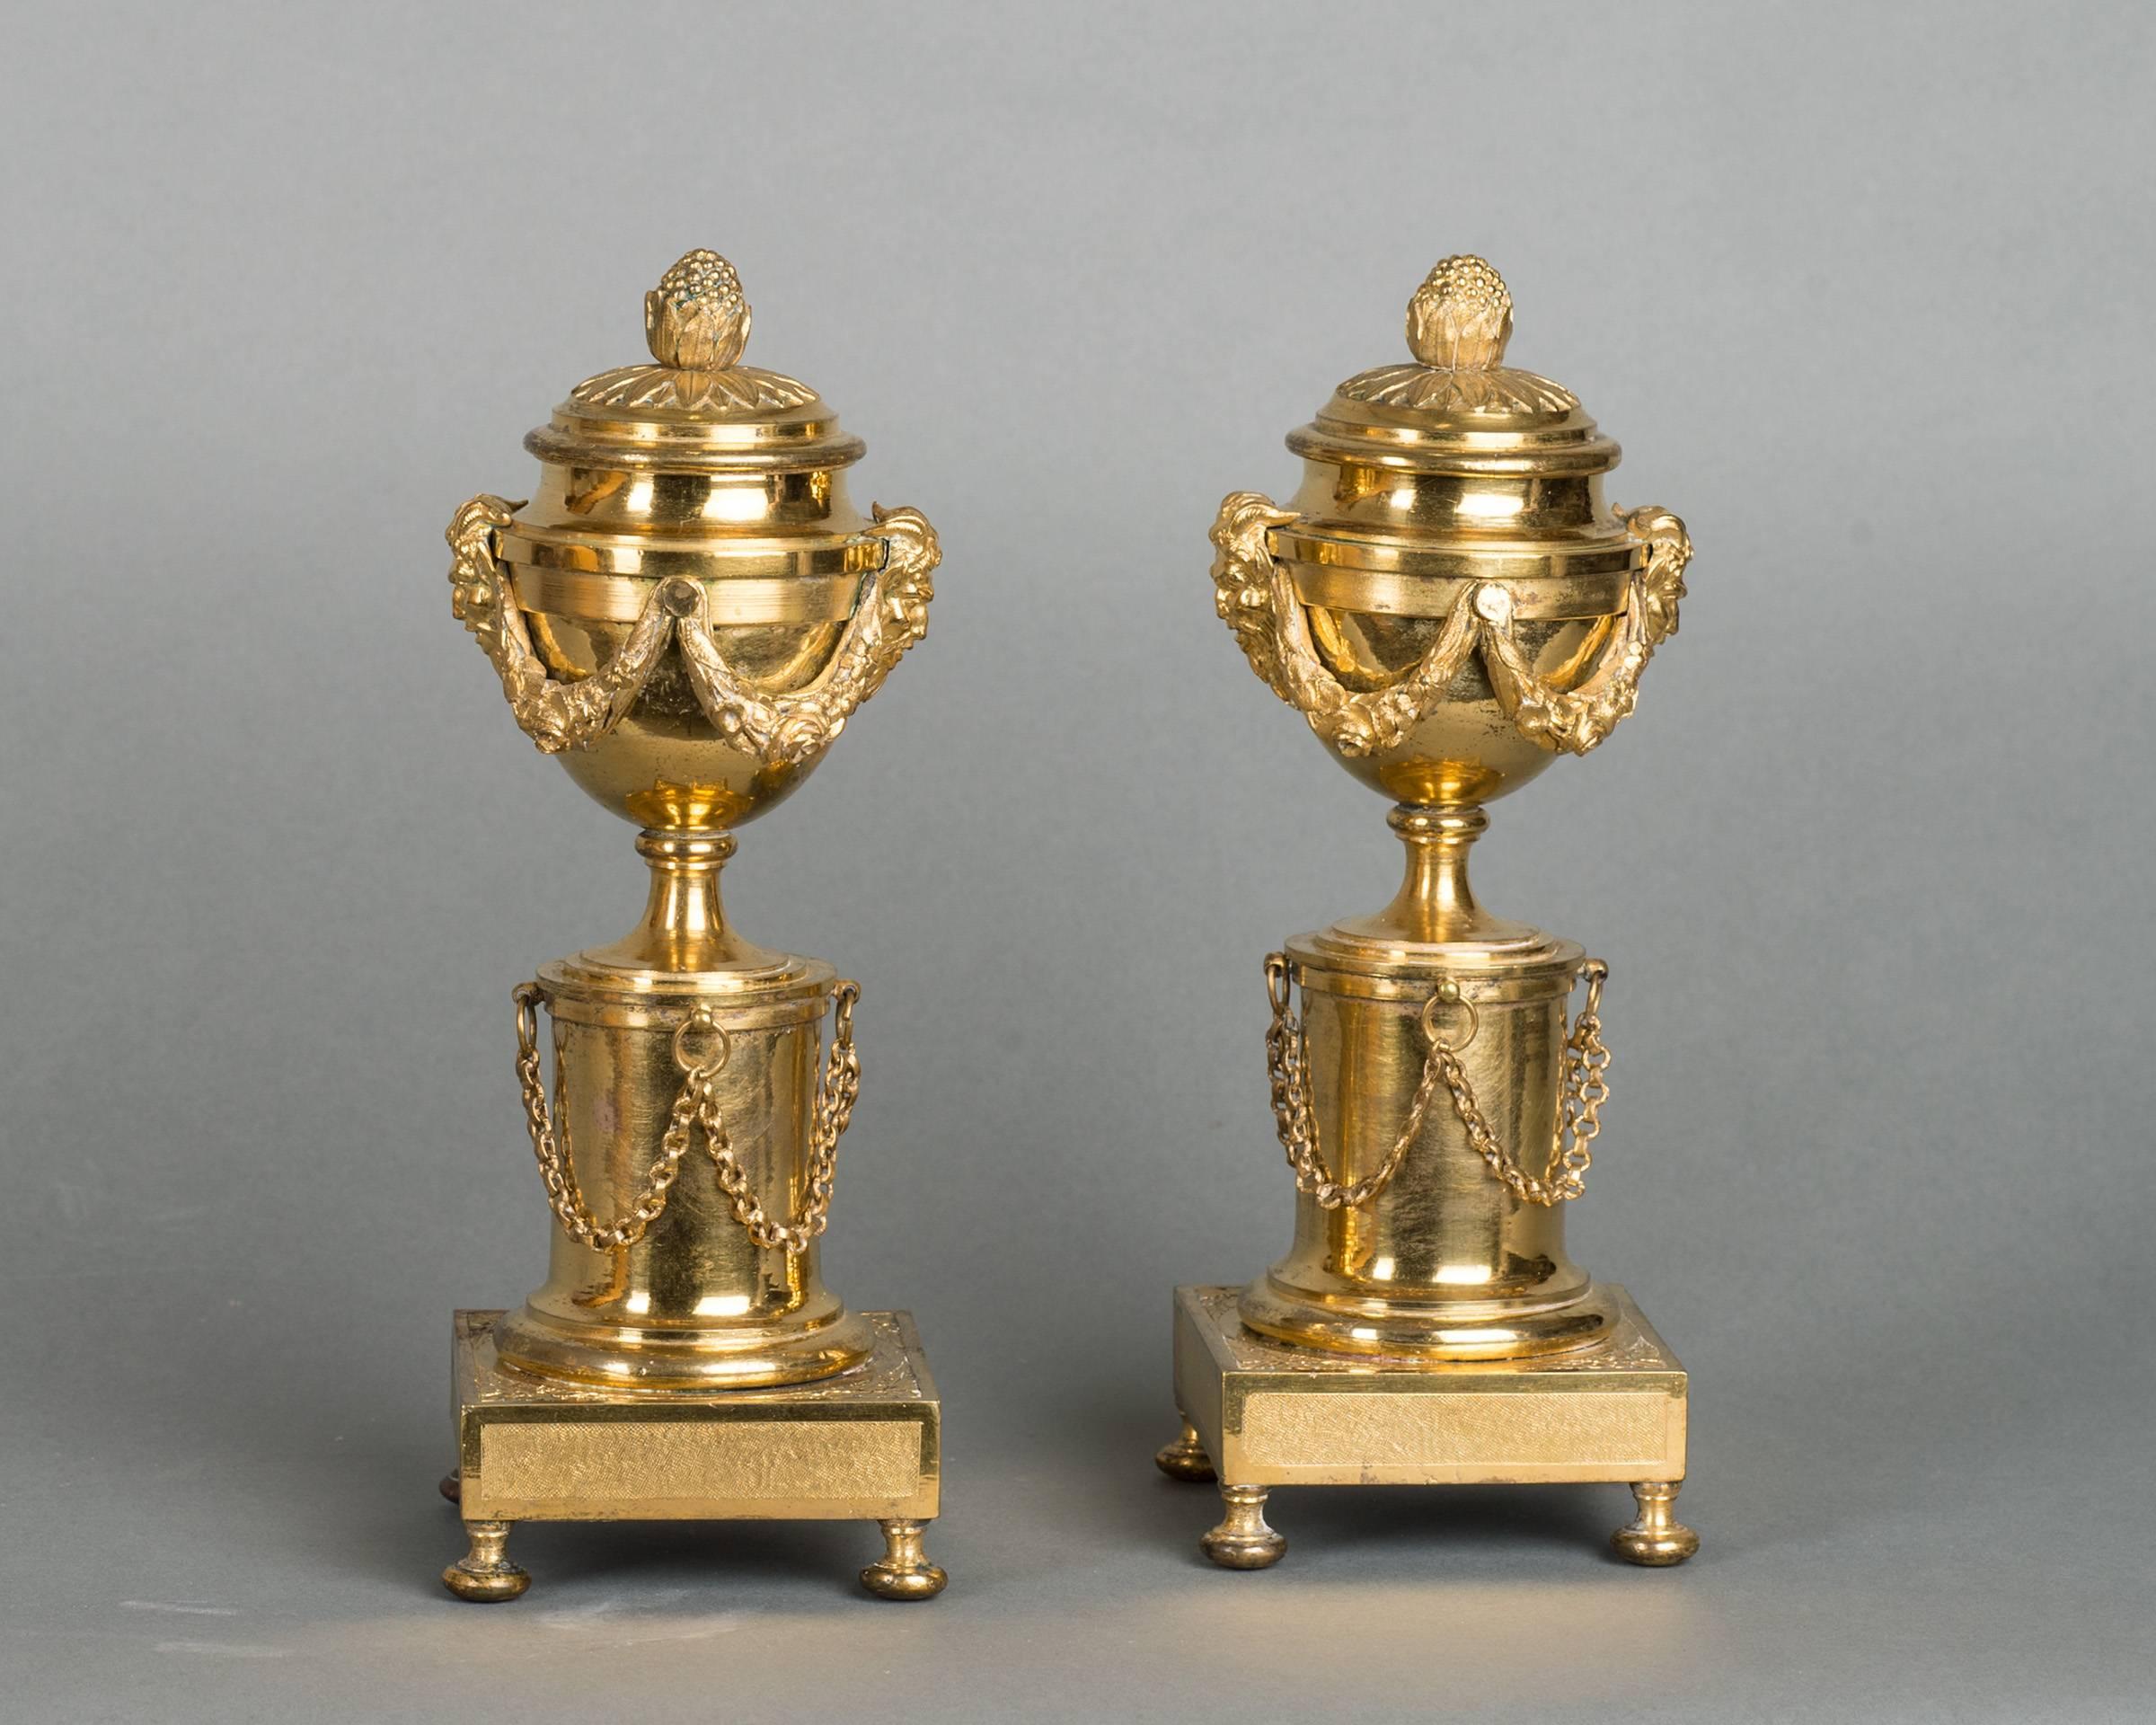 Louis XVI Very High Quality So Called Candle Sticks 